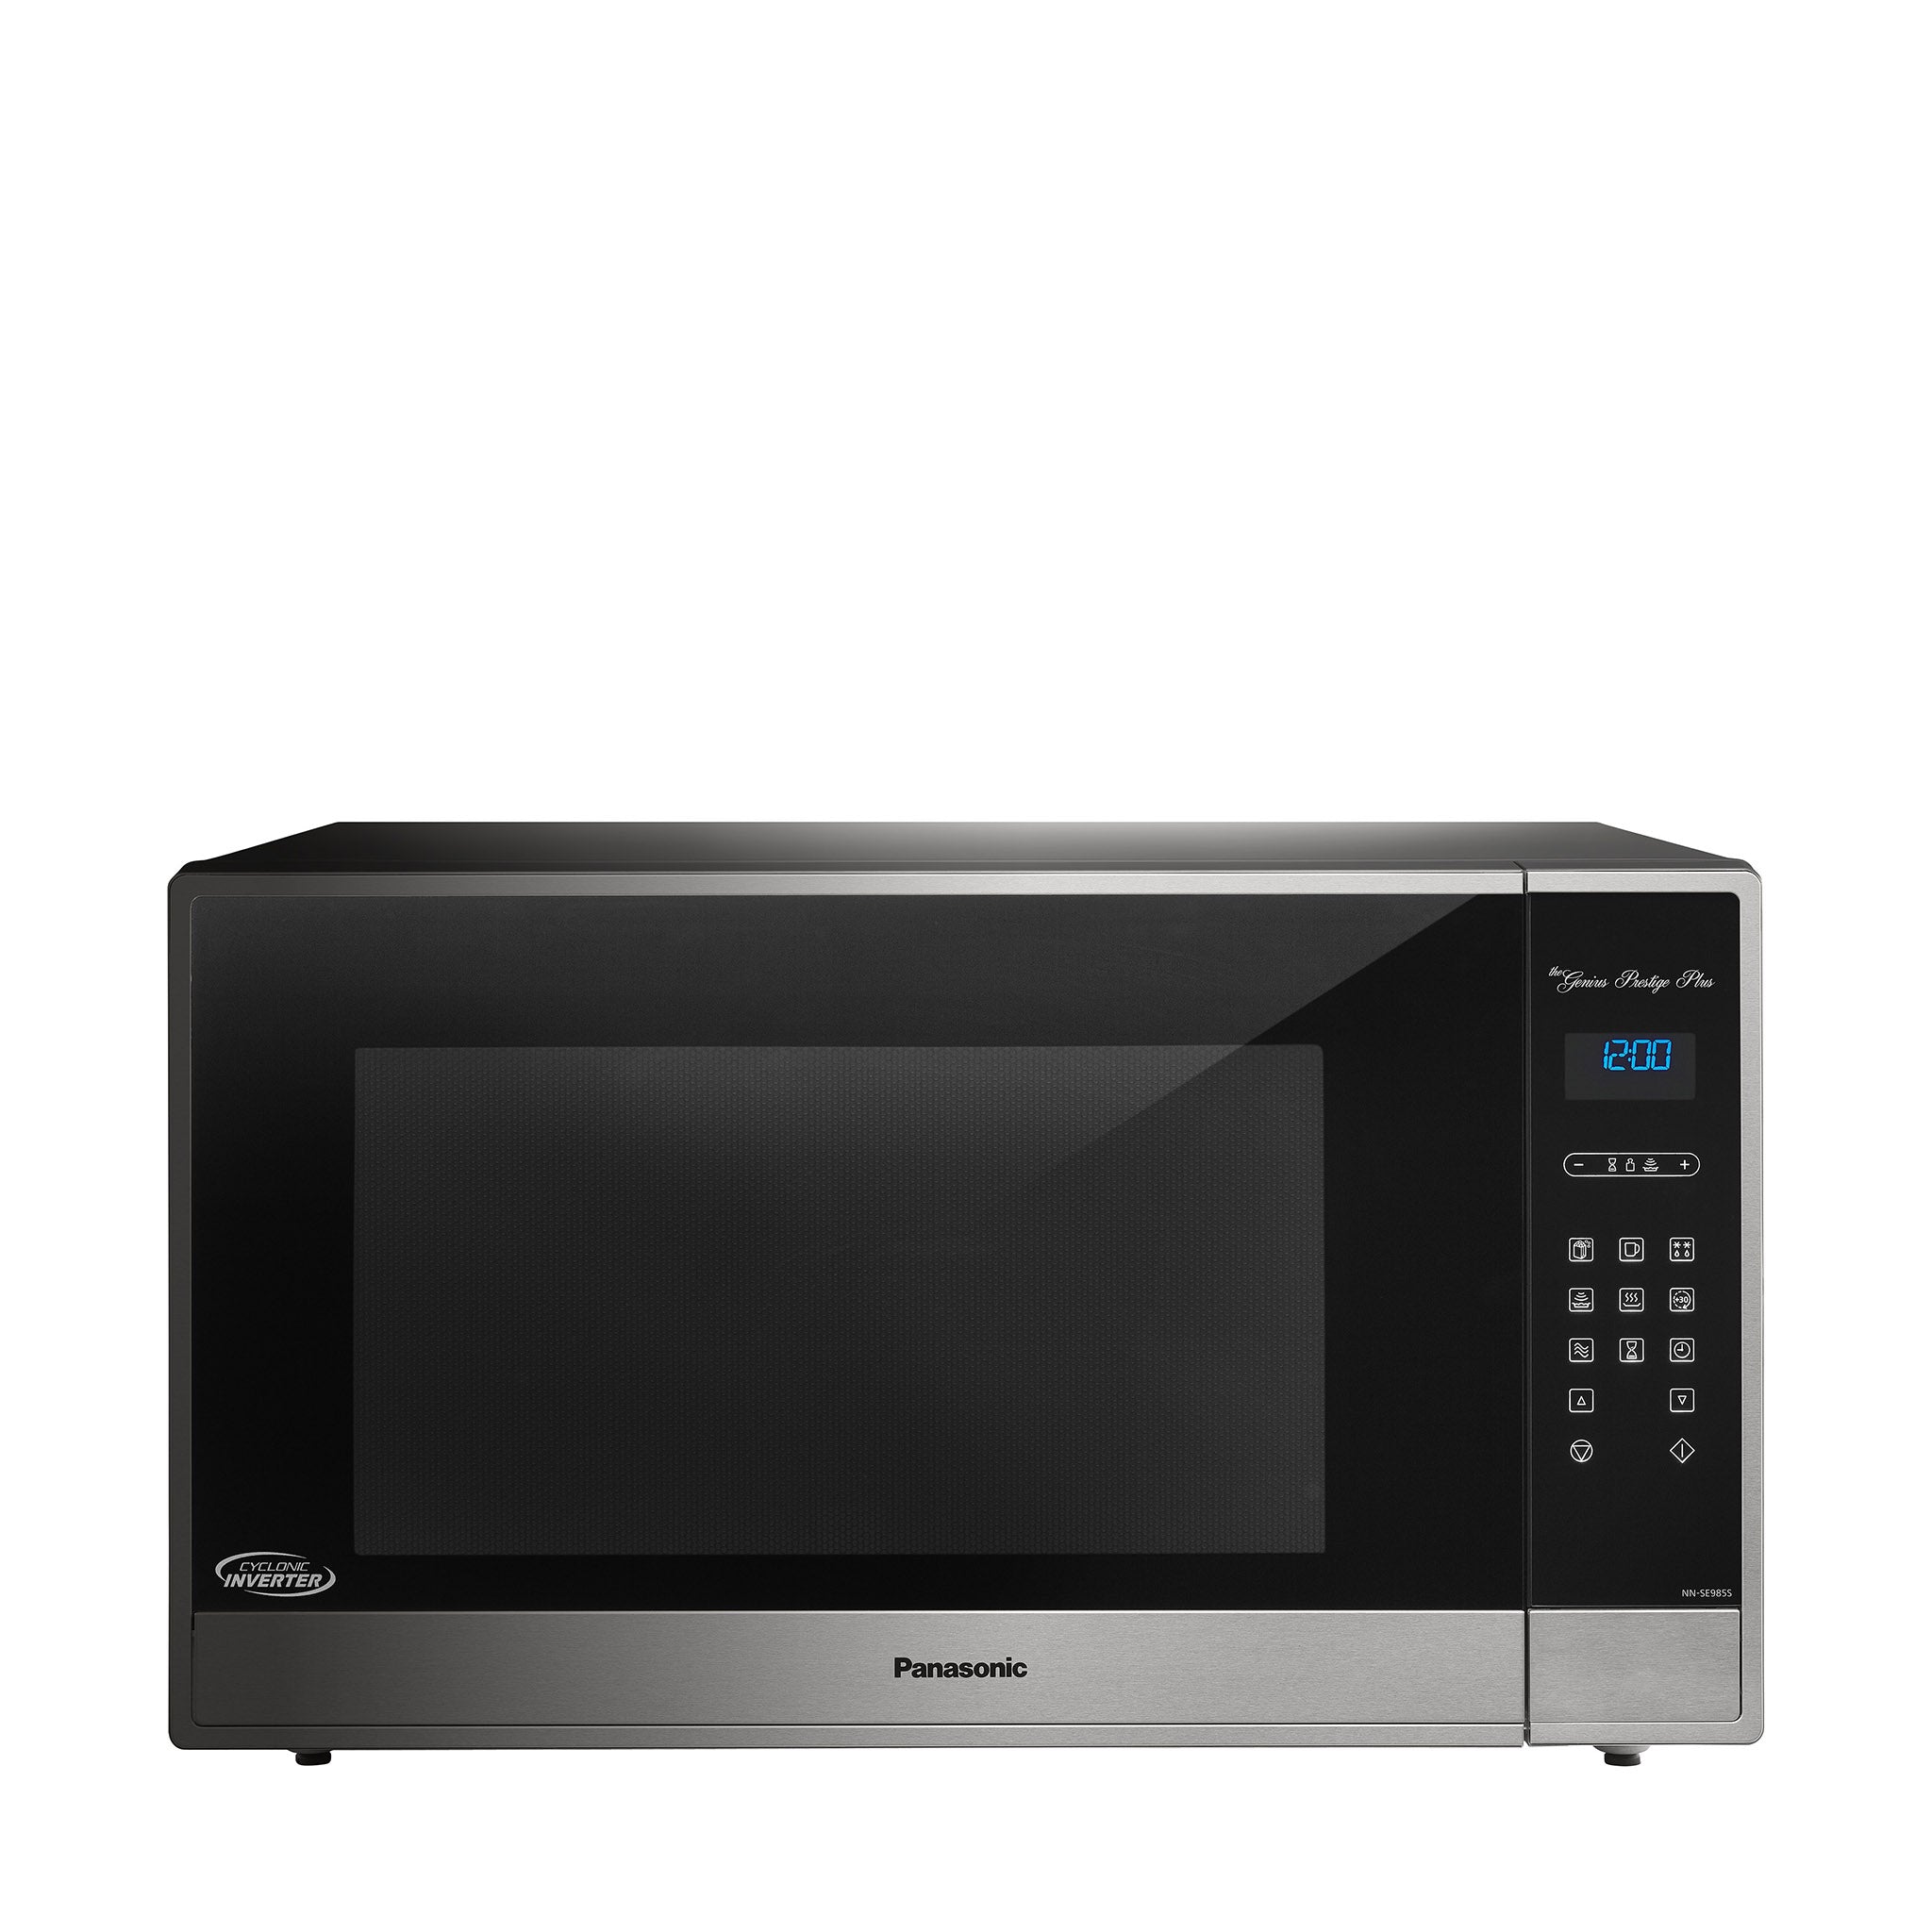 Panasonic Microwave Oven with Cyclonic Wave Inverter 1.6 cu. ft 